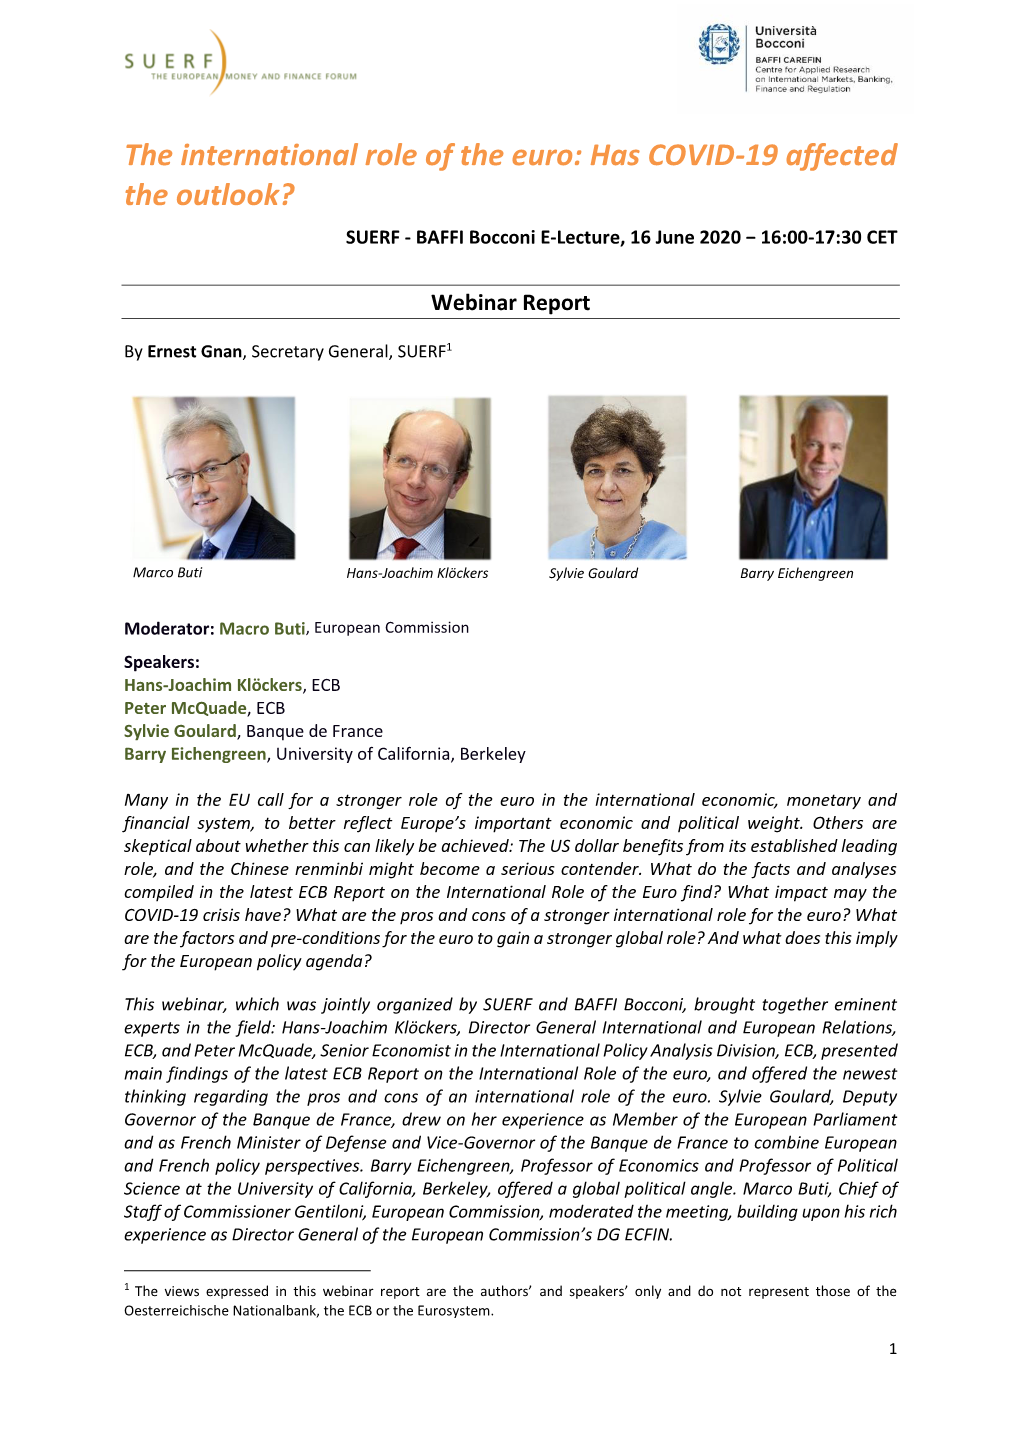 The International Role of the Euro: Has COVID-19 Affected the Outlook? SUERF - BAFFI Bocconi E-Lecture, 16 June 2020 − 16:00-17:30 CET